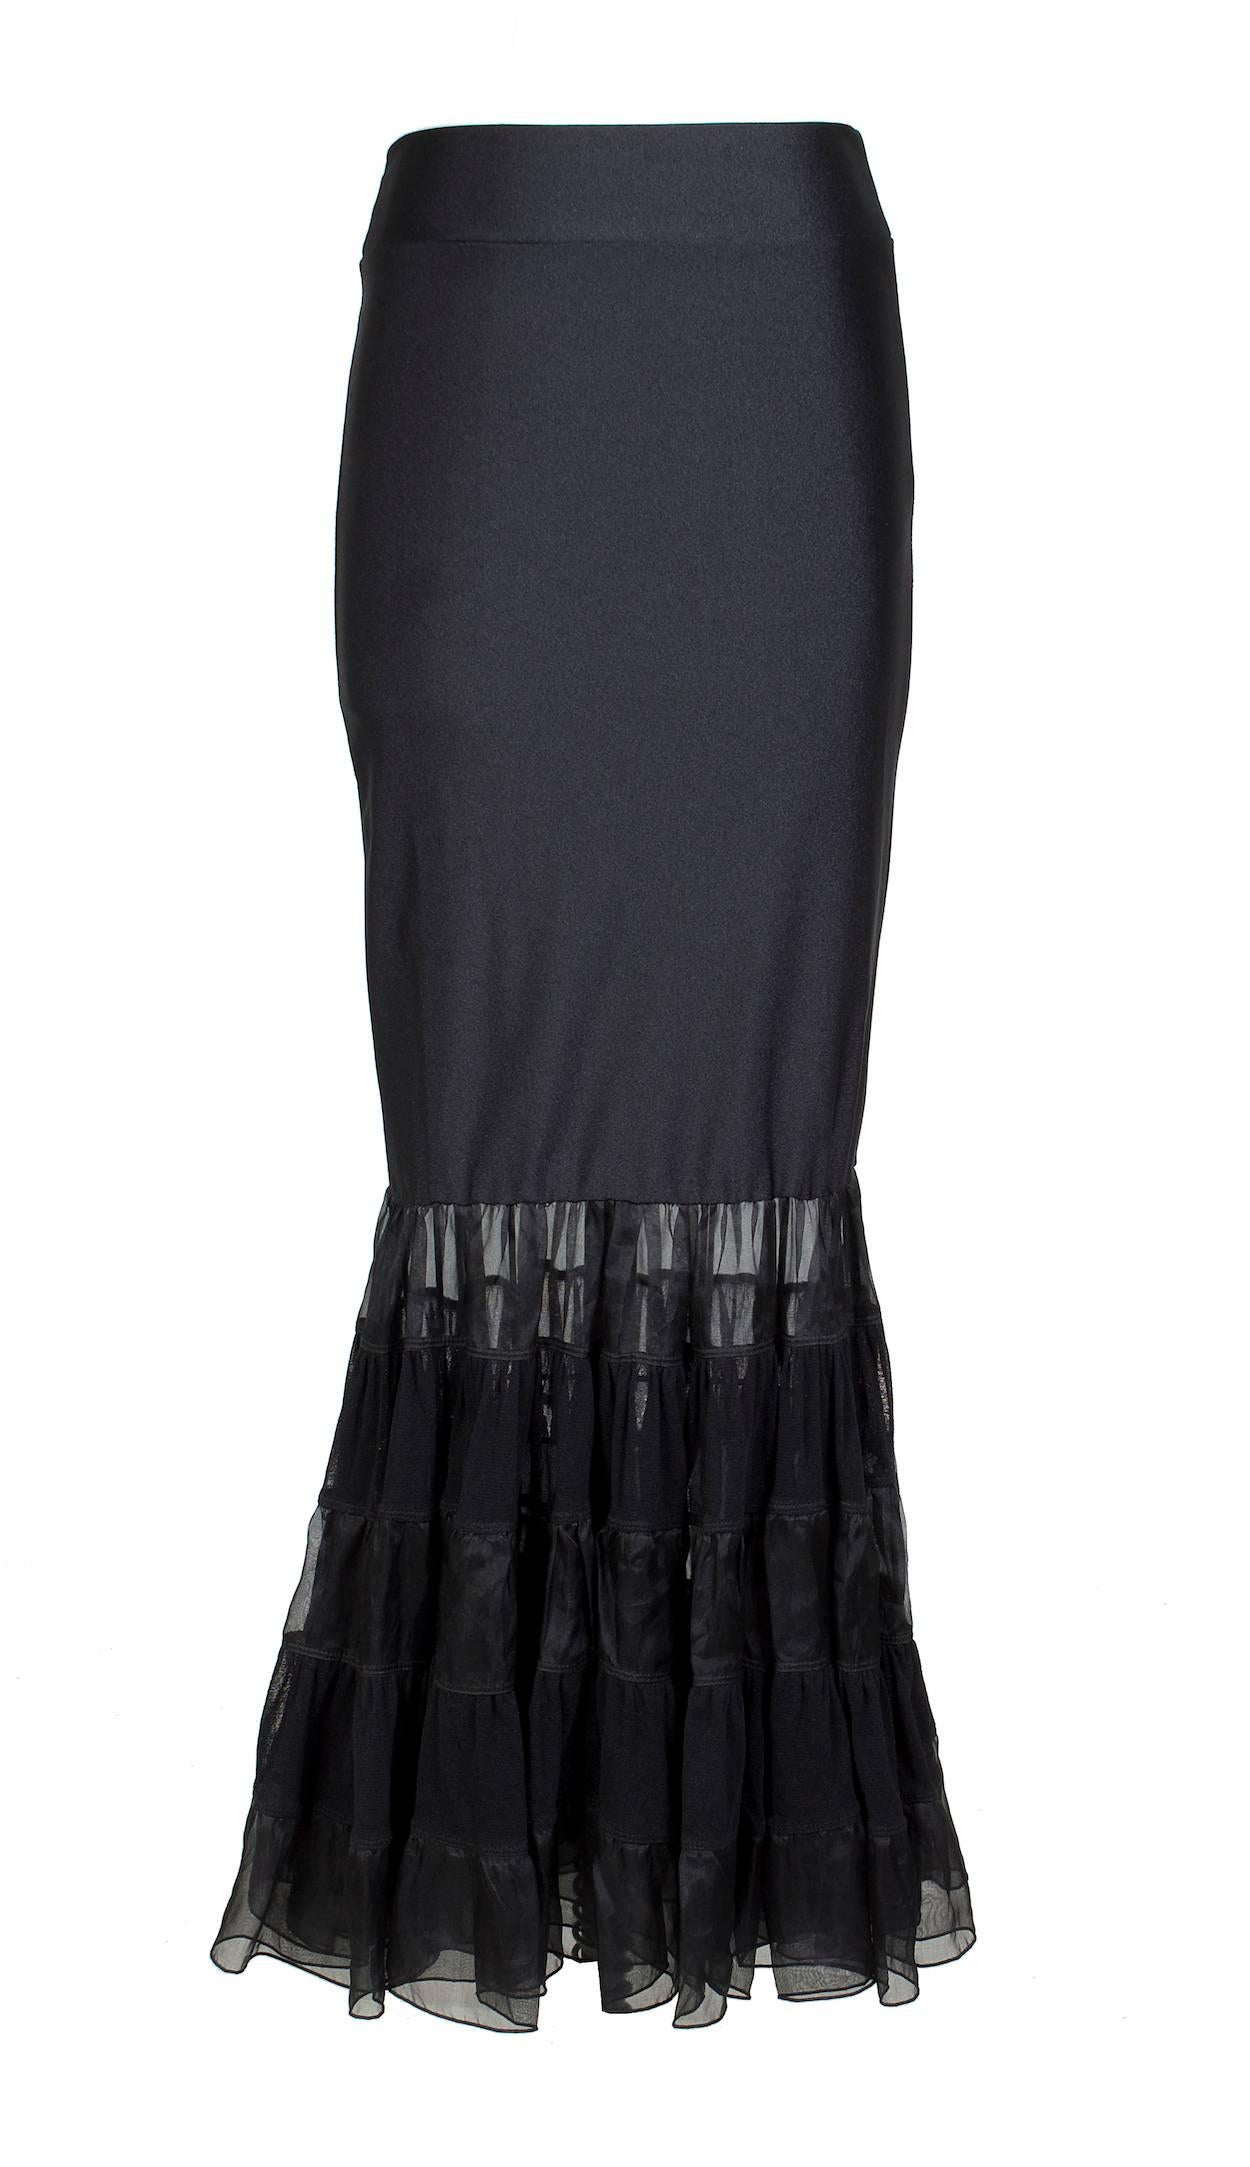 This is a tube skirt by Jean Paul Gaultier c. 2000s.  It can also be worn as a tube top dress.  The body is a black stretch material with layered and tiered ruffles at the bottom.  